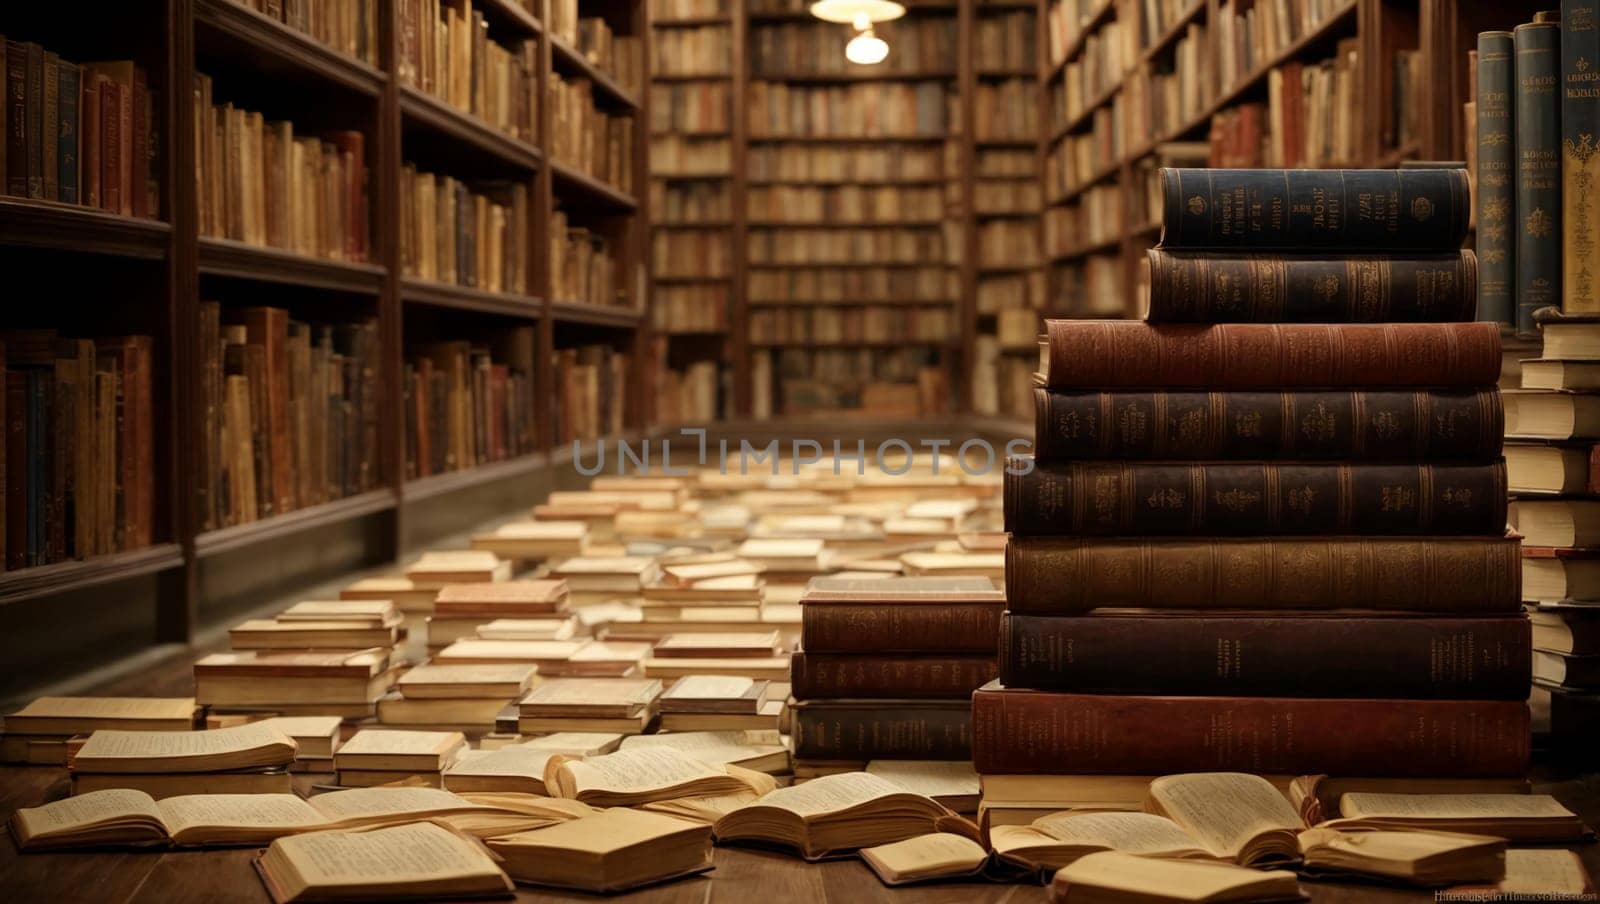 The books are stacked on the floor in different order It seems that their location is well thought out and scrupulously organized. Each book lies next to the other with the diligence of a knowledge seeker, creating a harmonious symphony of literary works.